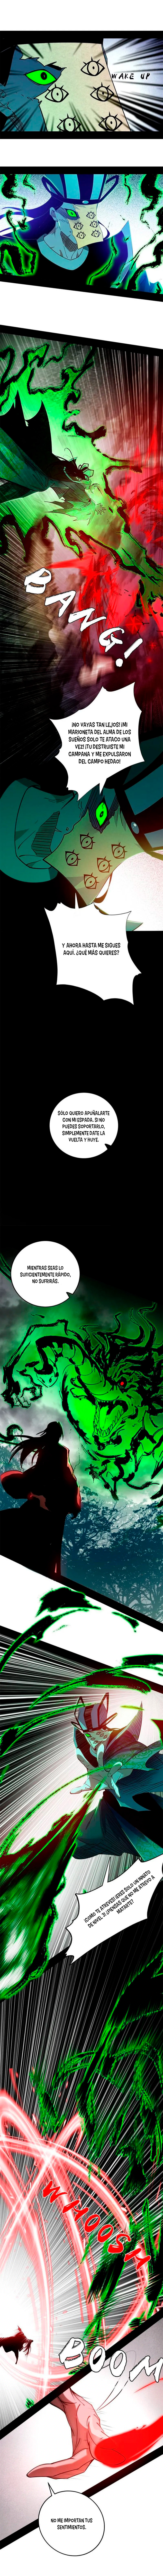 Manga Soy un dios maligno Chapter 314 image number 2